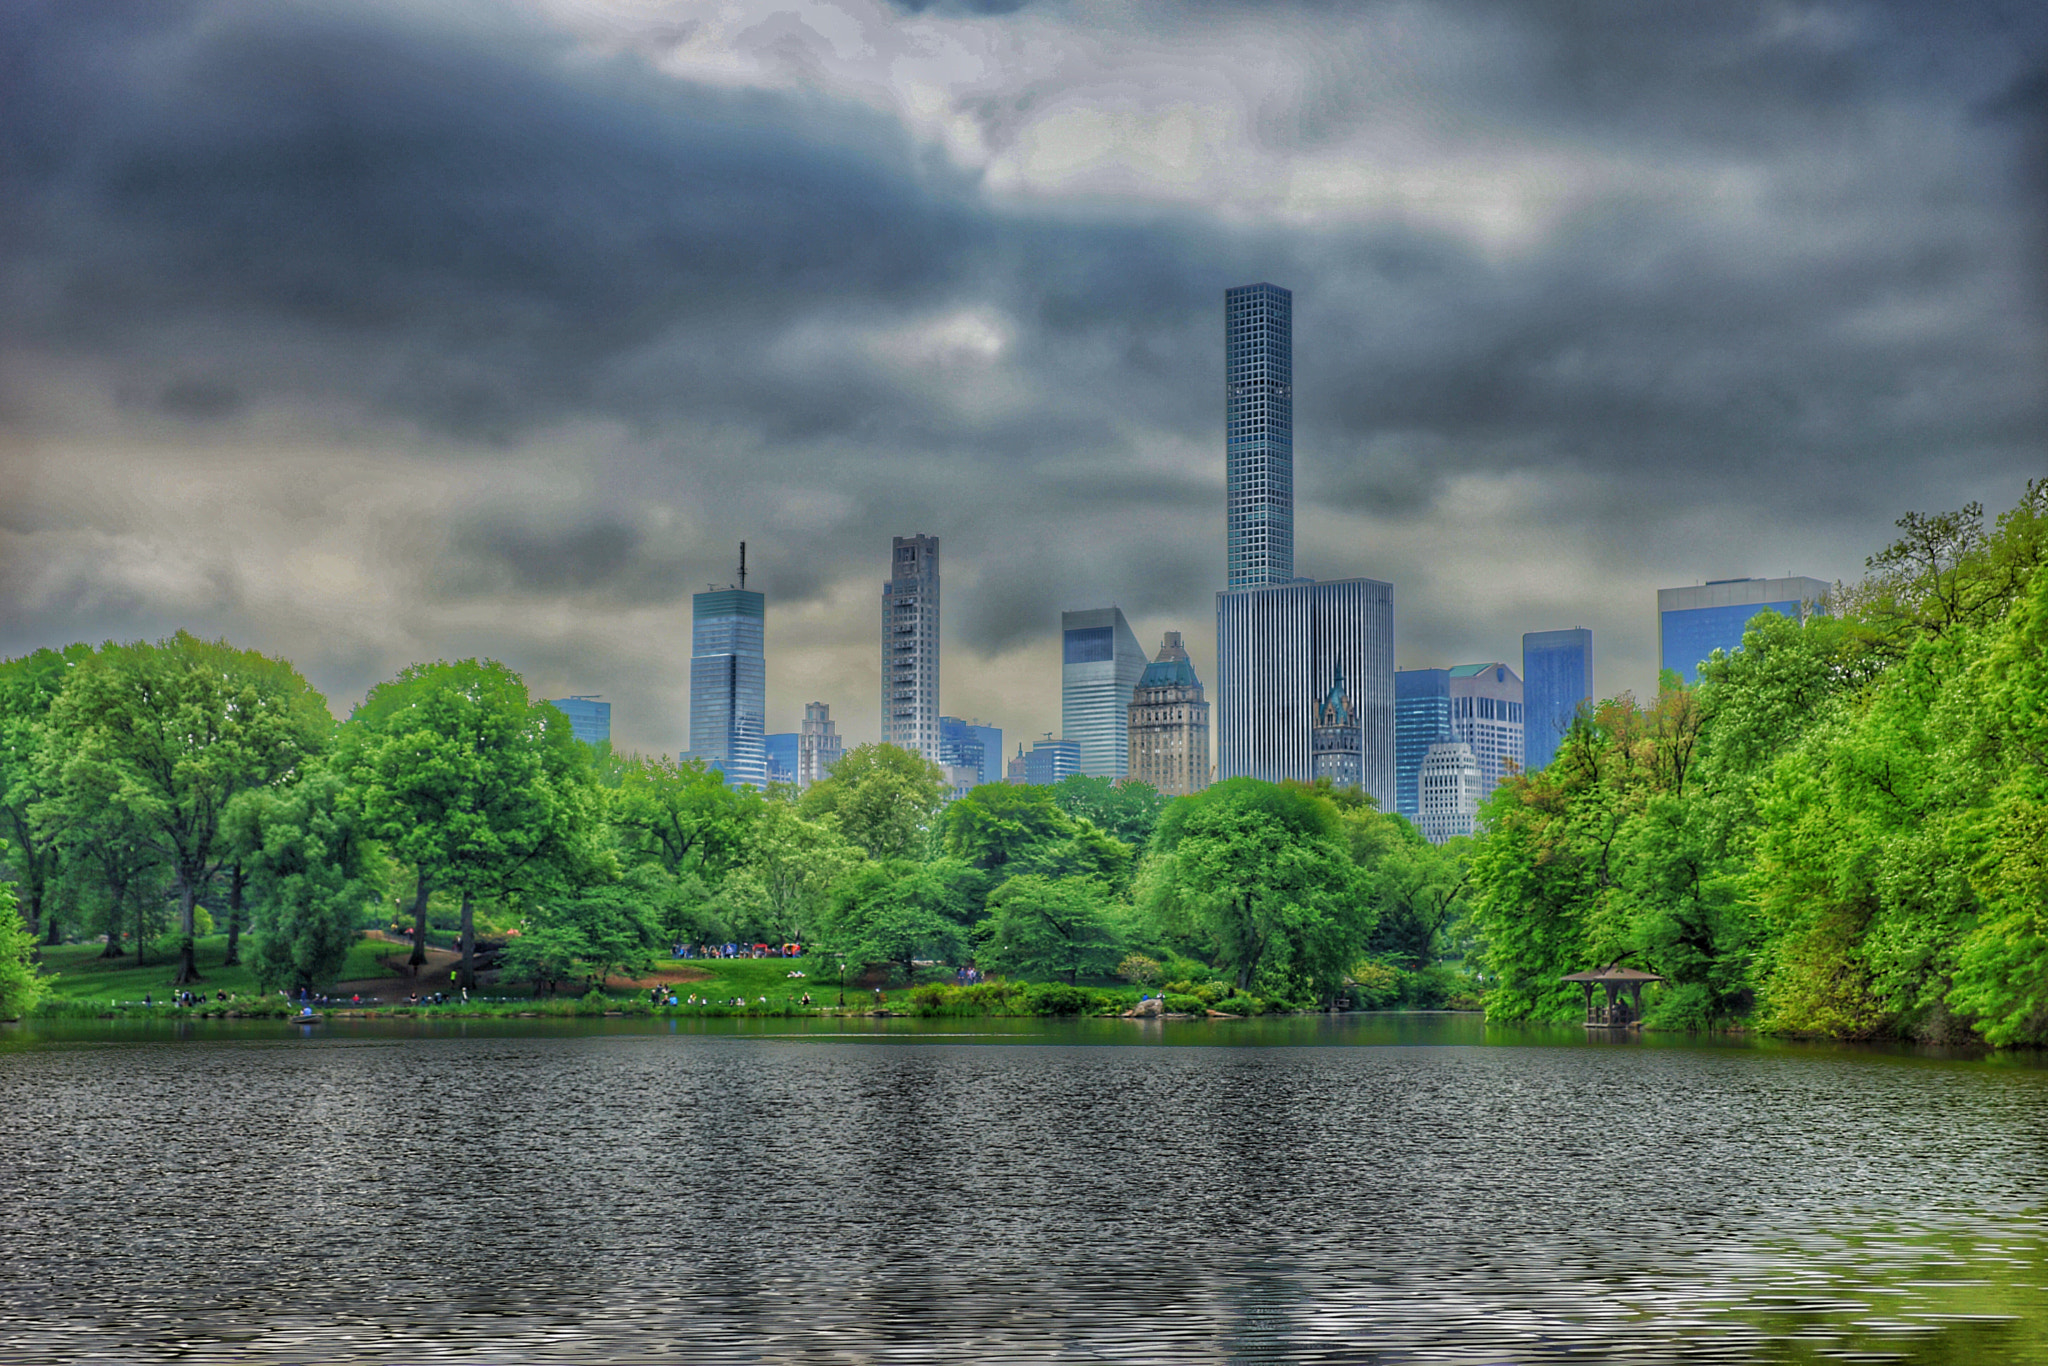 Hasselblad HV sample photo. A little piece of new york city from central park on an overcast day photography